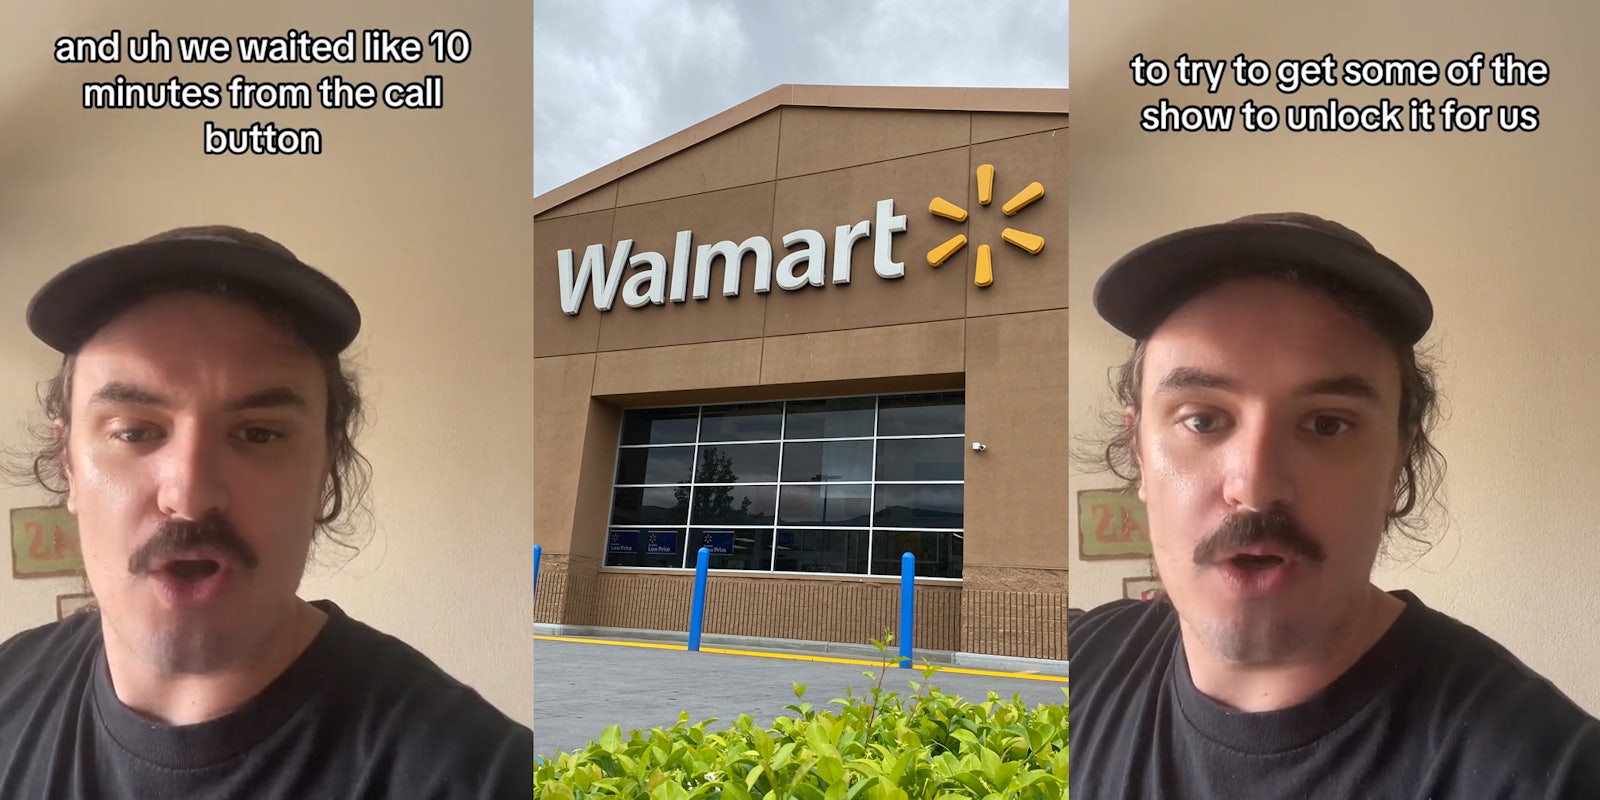 Walmart customer speaking with caption 'and uh we waited like 10 minutes from the call button' (l) Walmart building with sign (c) Walmart customer speaking with caption 'to try to get some of the show to unlock it for us' (r)